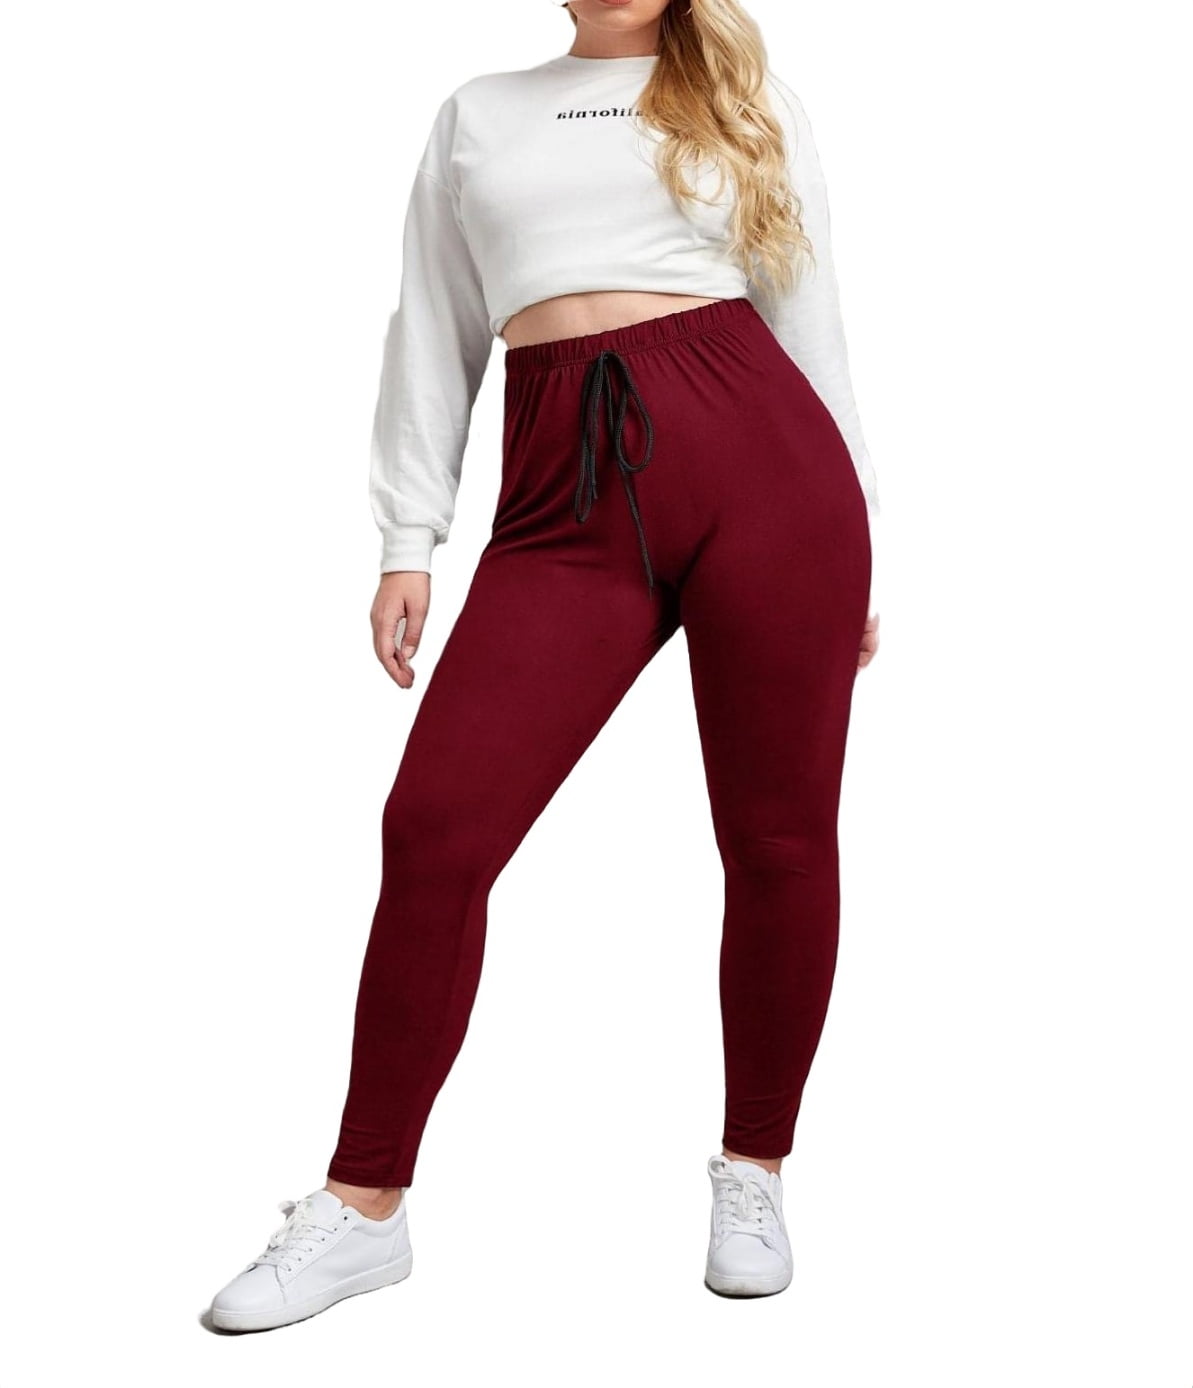 Women's Plus Size High Waist Stretchy Knot Front Solid Leggings